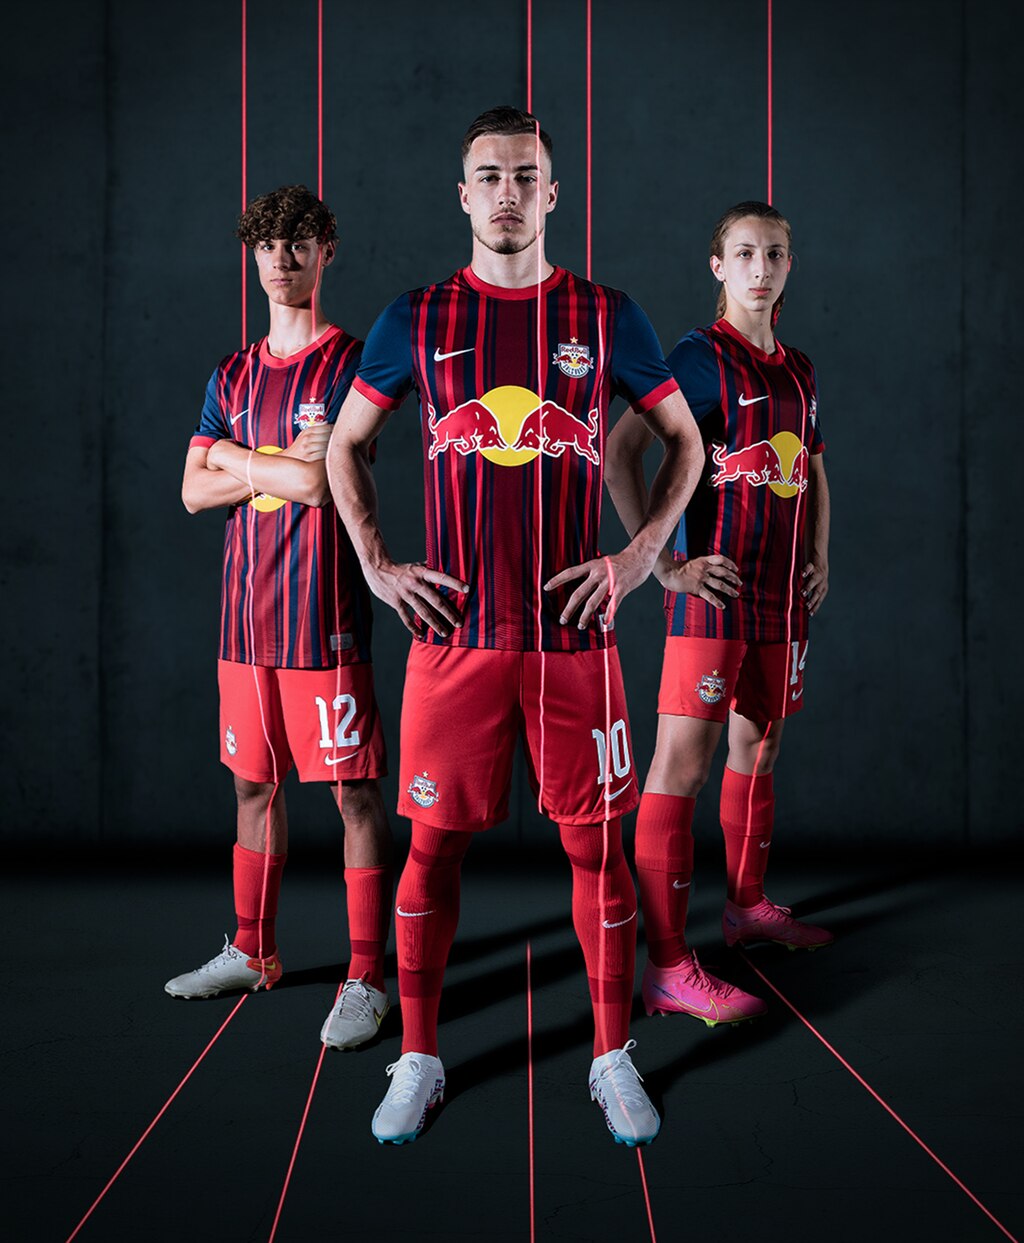 Shaping the Future: Red Bull Salzburg 23-24 Away Kit Released